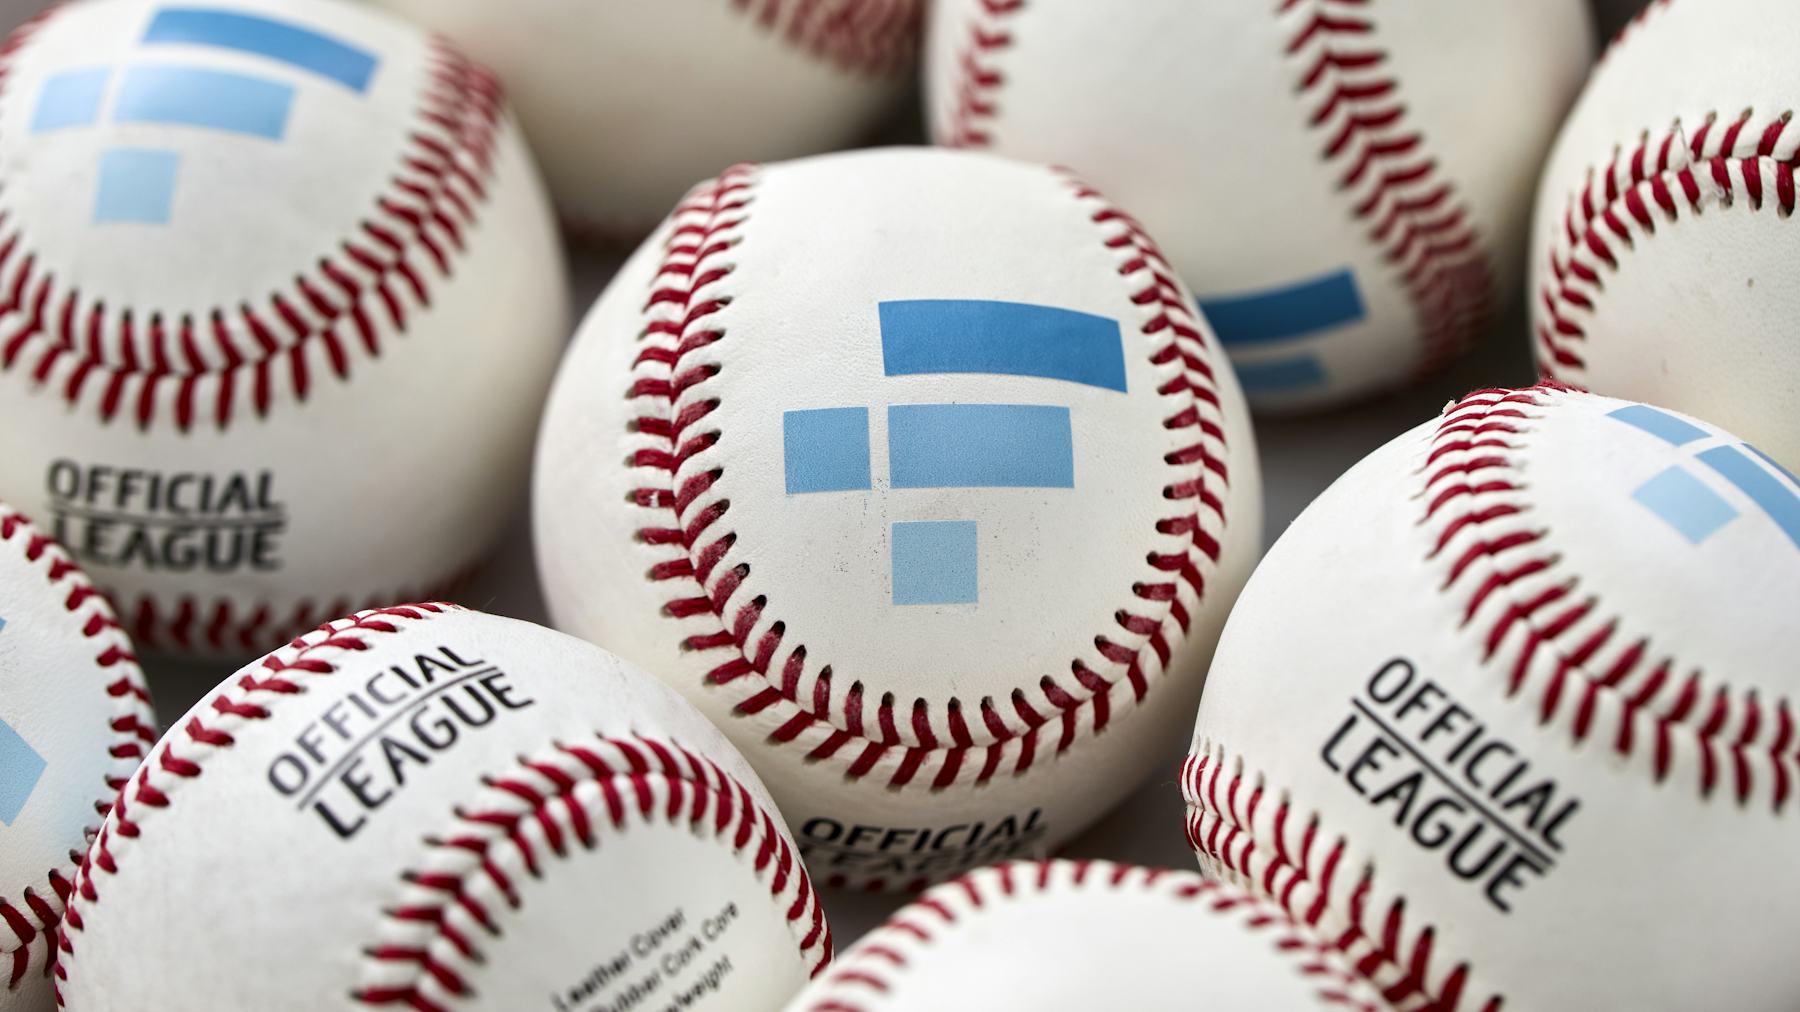 MLB Strike Cryptocurrency Partnership with FTX